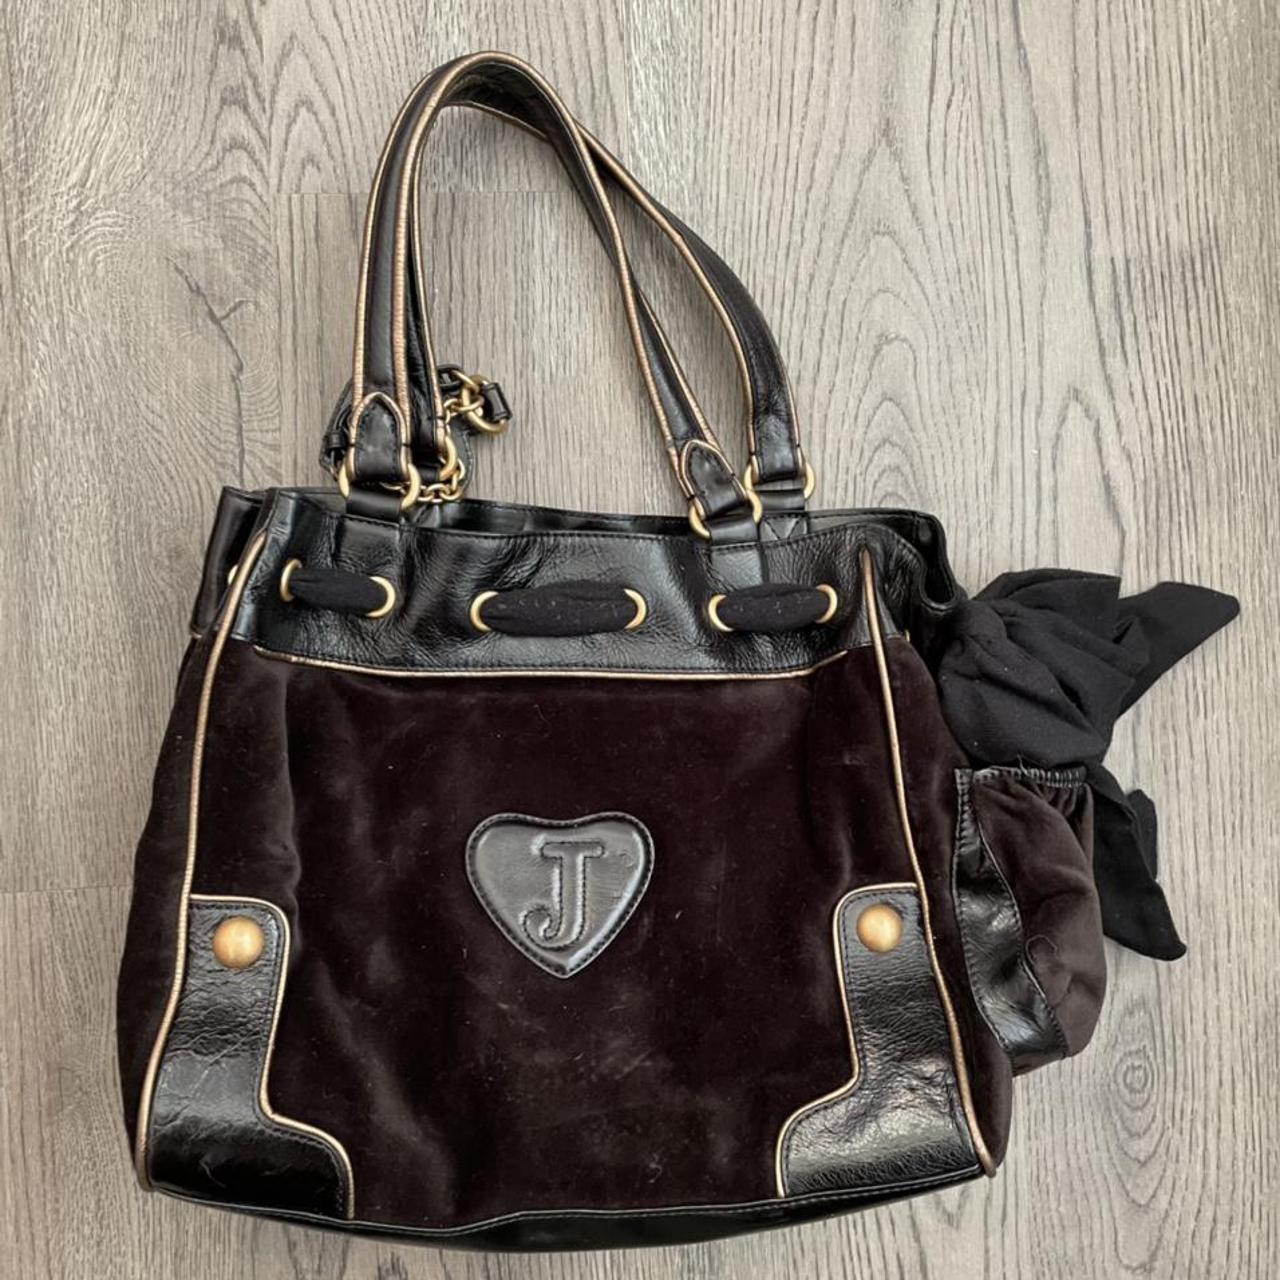 Juicy Couture Women's Brown and Gold Bag (2)